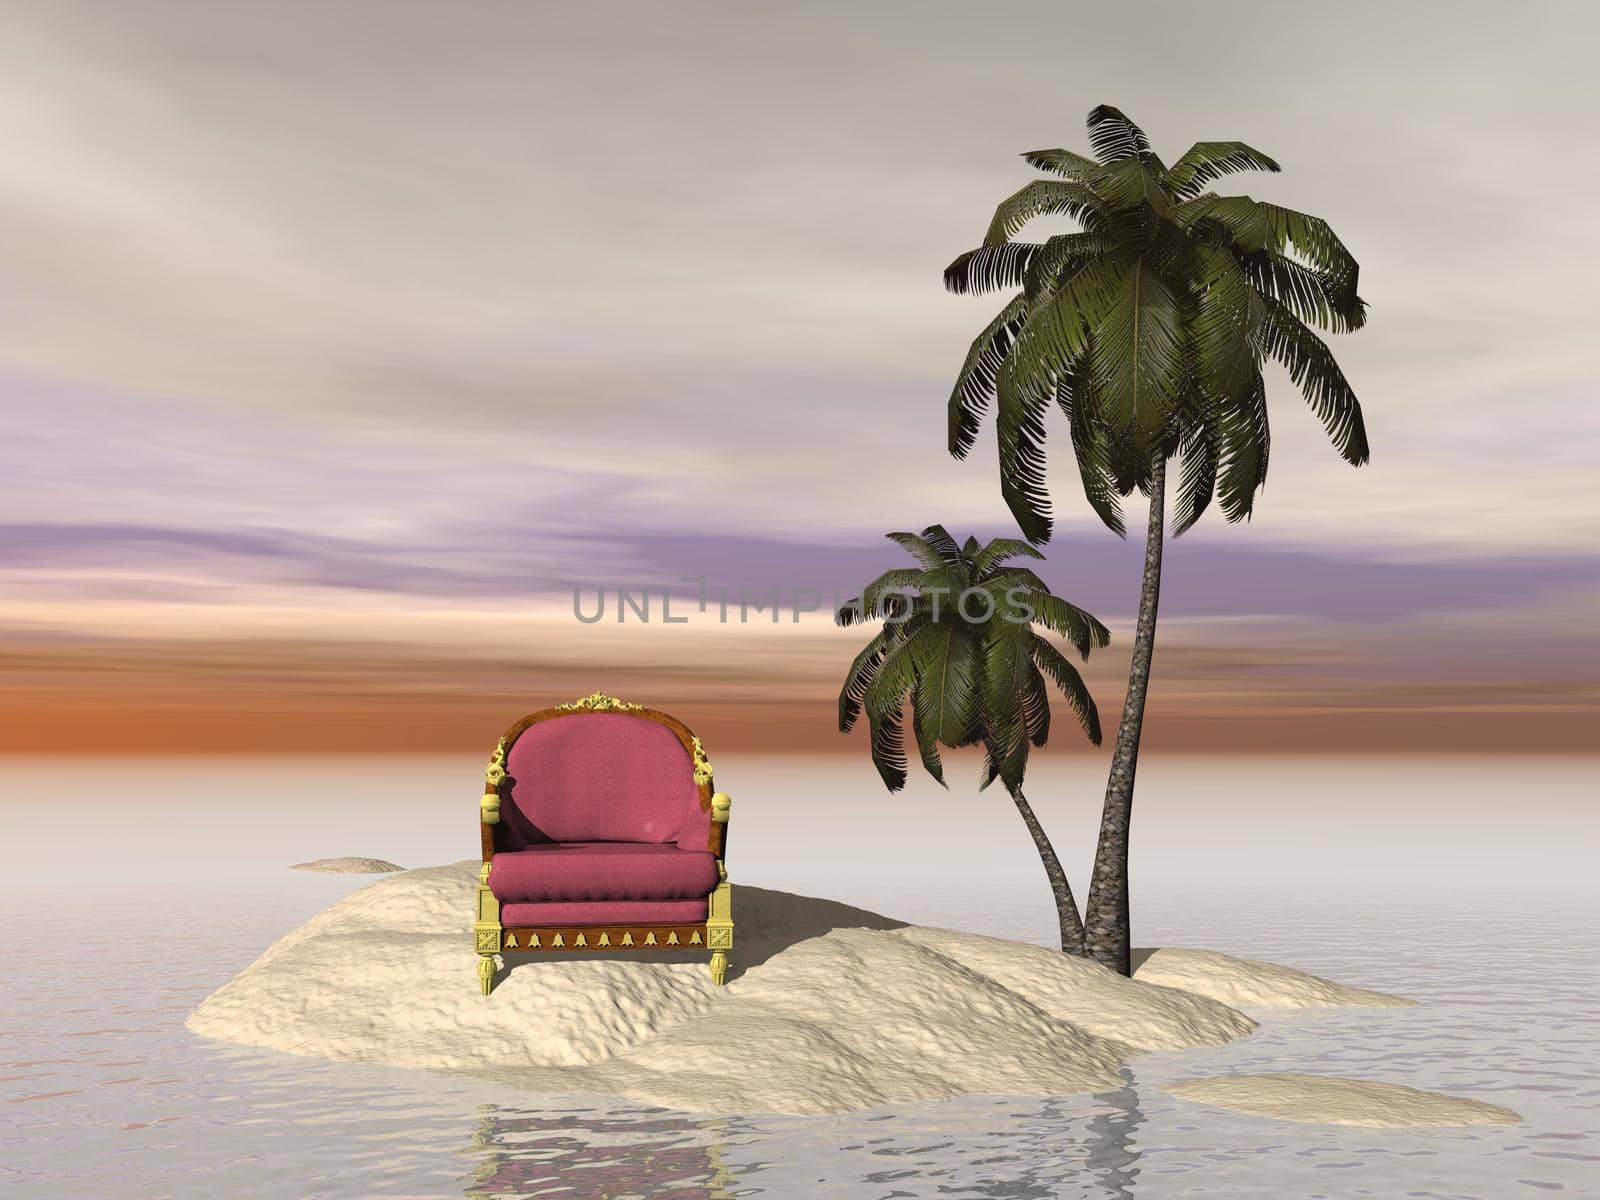 Golden and red royal armchair on an island by cloudy day